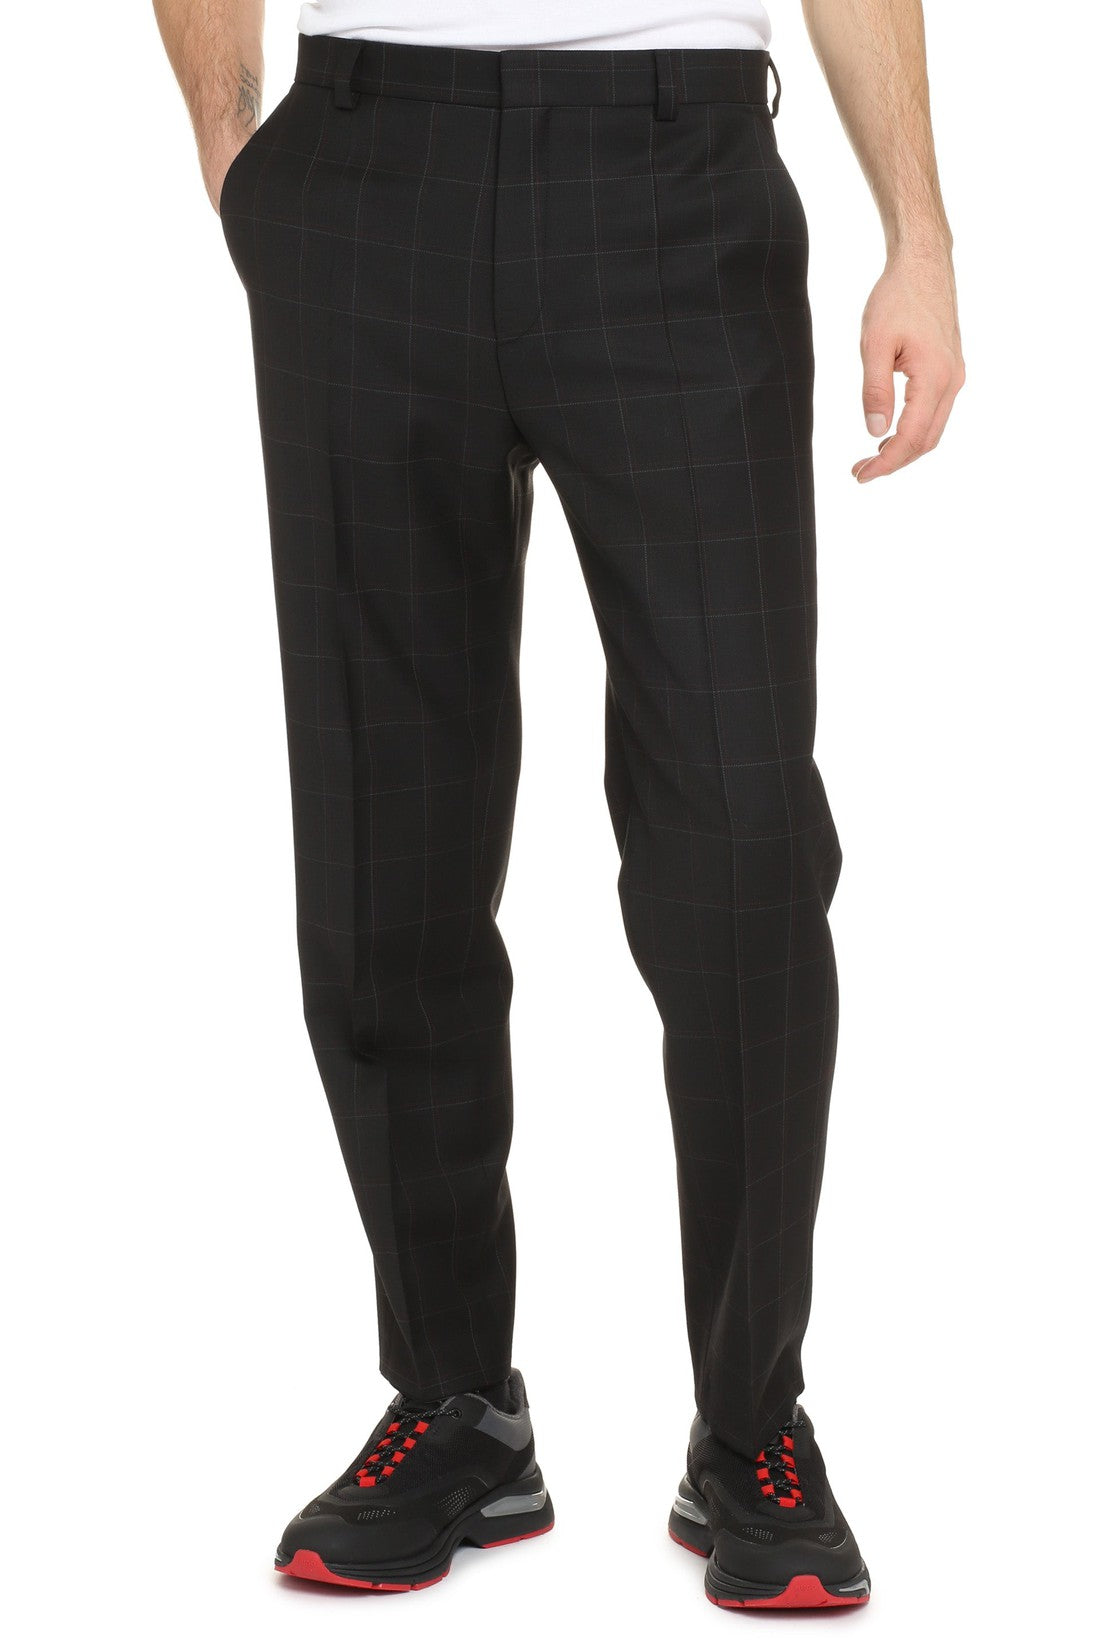 BOSS-OUTLET-SALE-Stretch wool trousers-ARCHIVIST